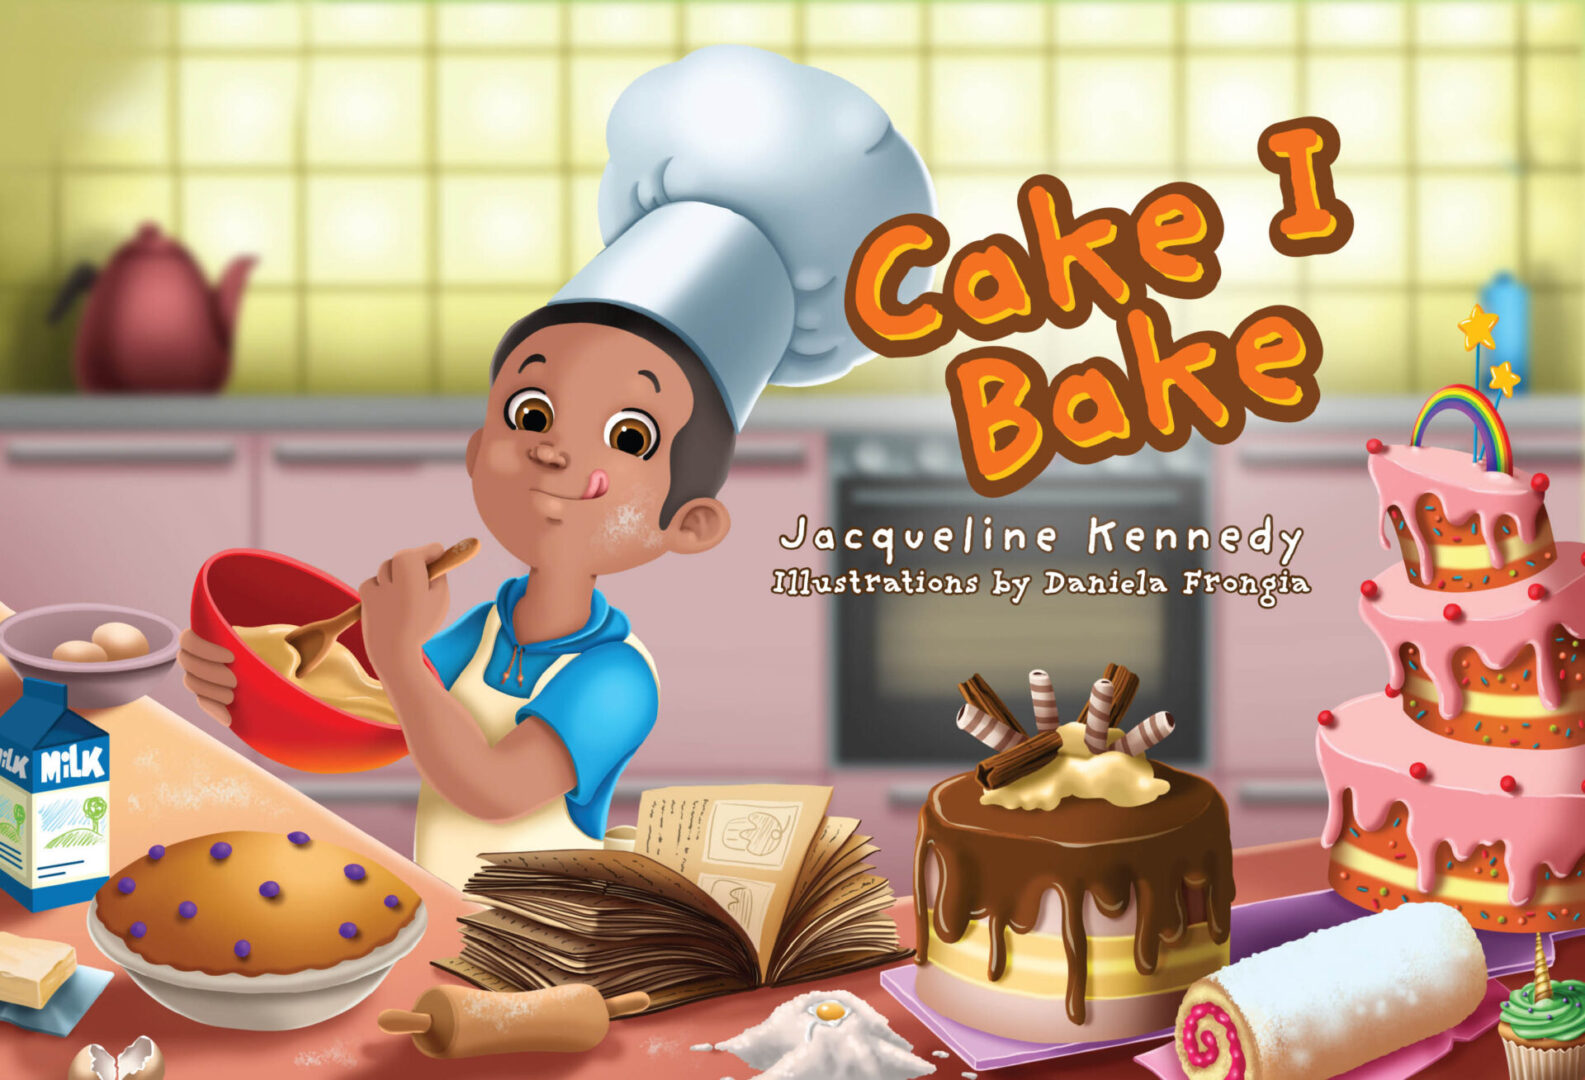 An illustration of a cheerful young chef in a kitchen with baked goods and a cookbook, promoting a book titled "Cake I Bake" by Jacqueline Kennedy.